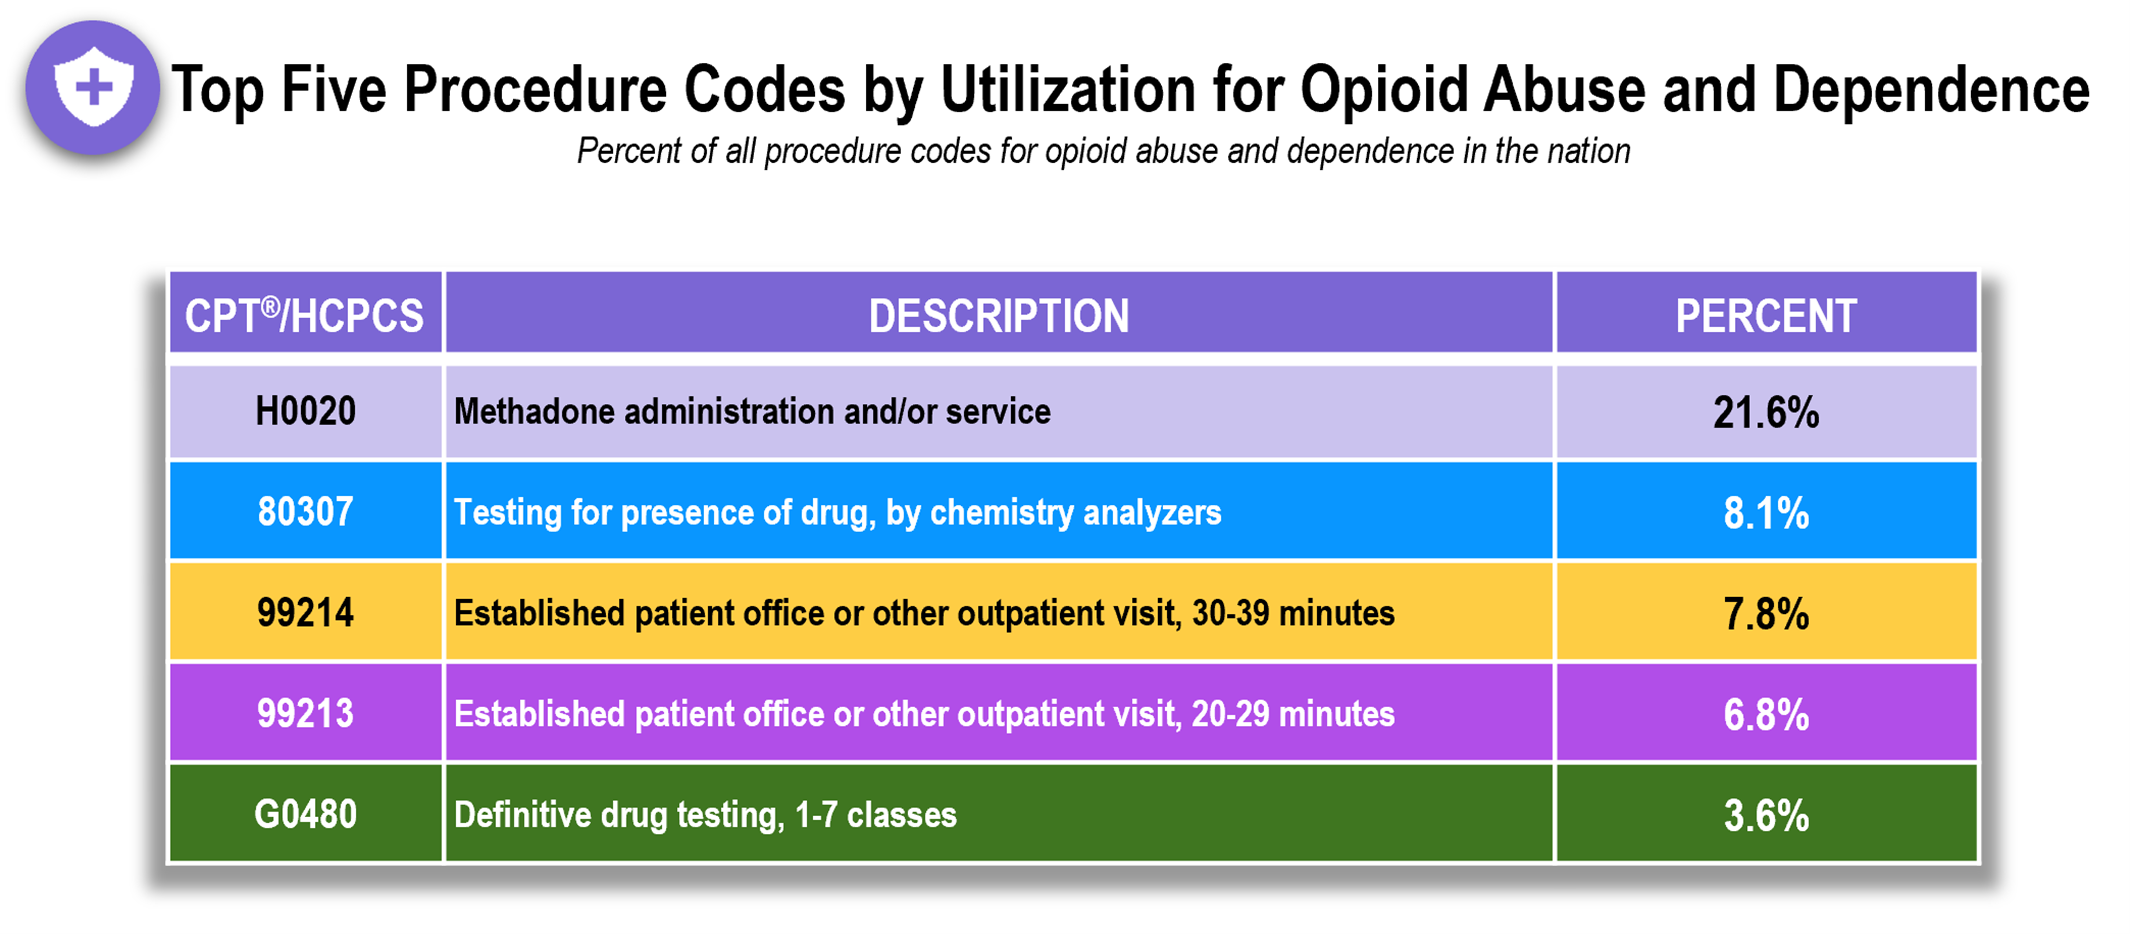 Figure 1. Top 5 Procedure Codes By Utilization For Opioid Abuse and Dependence, National, 2022. Credit: FAIR Health